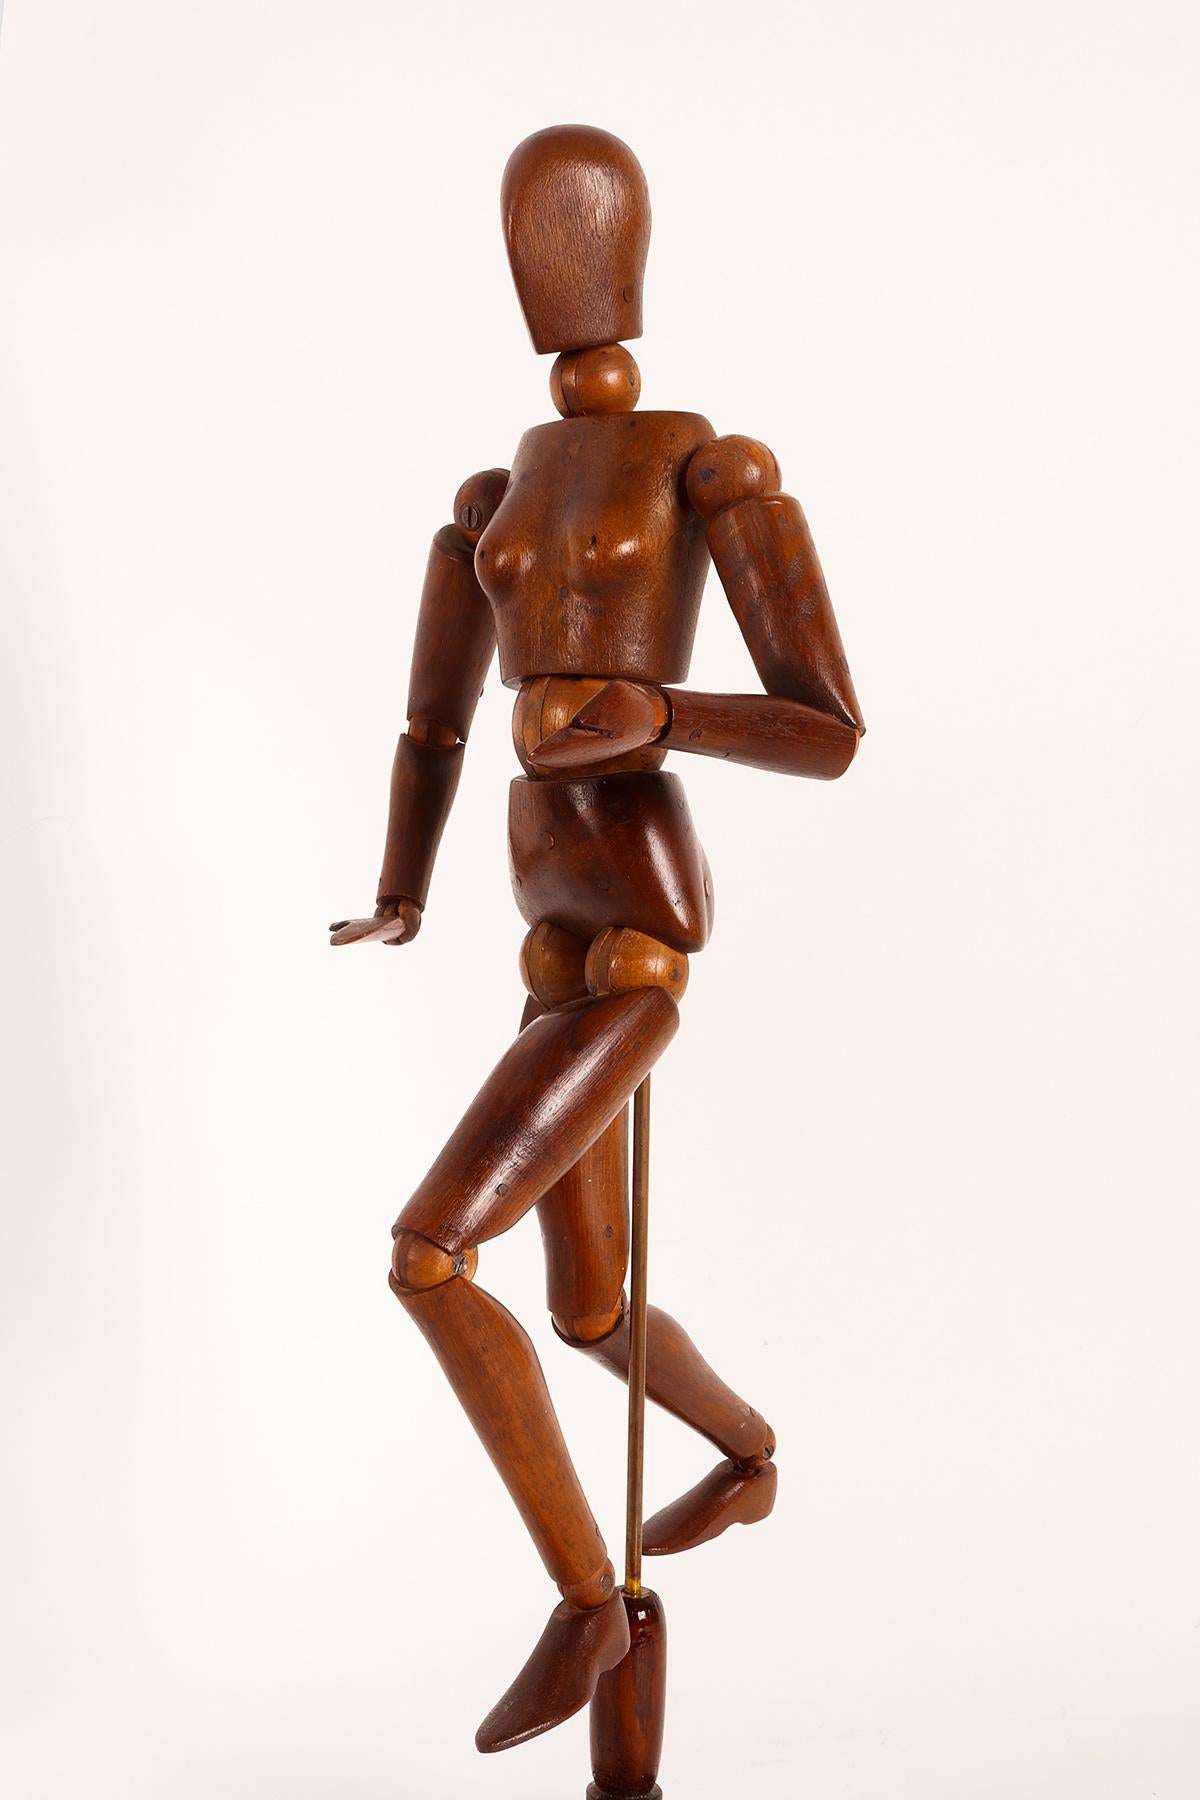 Painter's articulated mannequin depicting a woman, with a metaphysical face. The mannequin is made of carved national walnut wood for the body parts and maple wood for the spheres in the joints. The base is made out of fruitwood with a brass